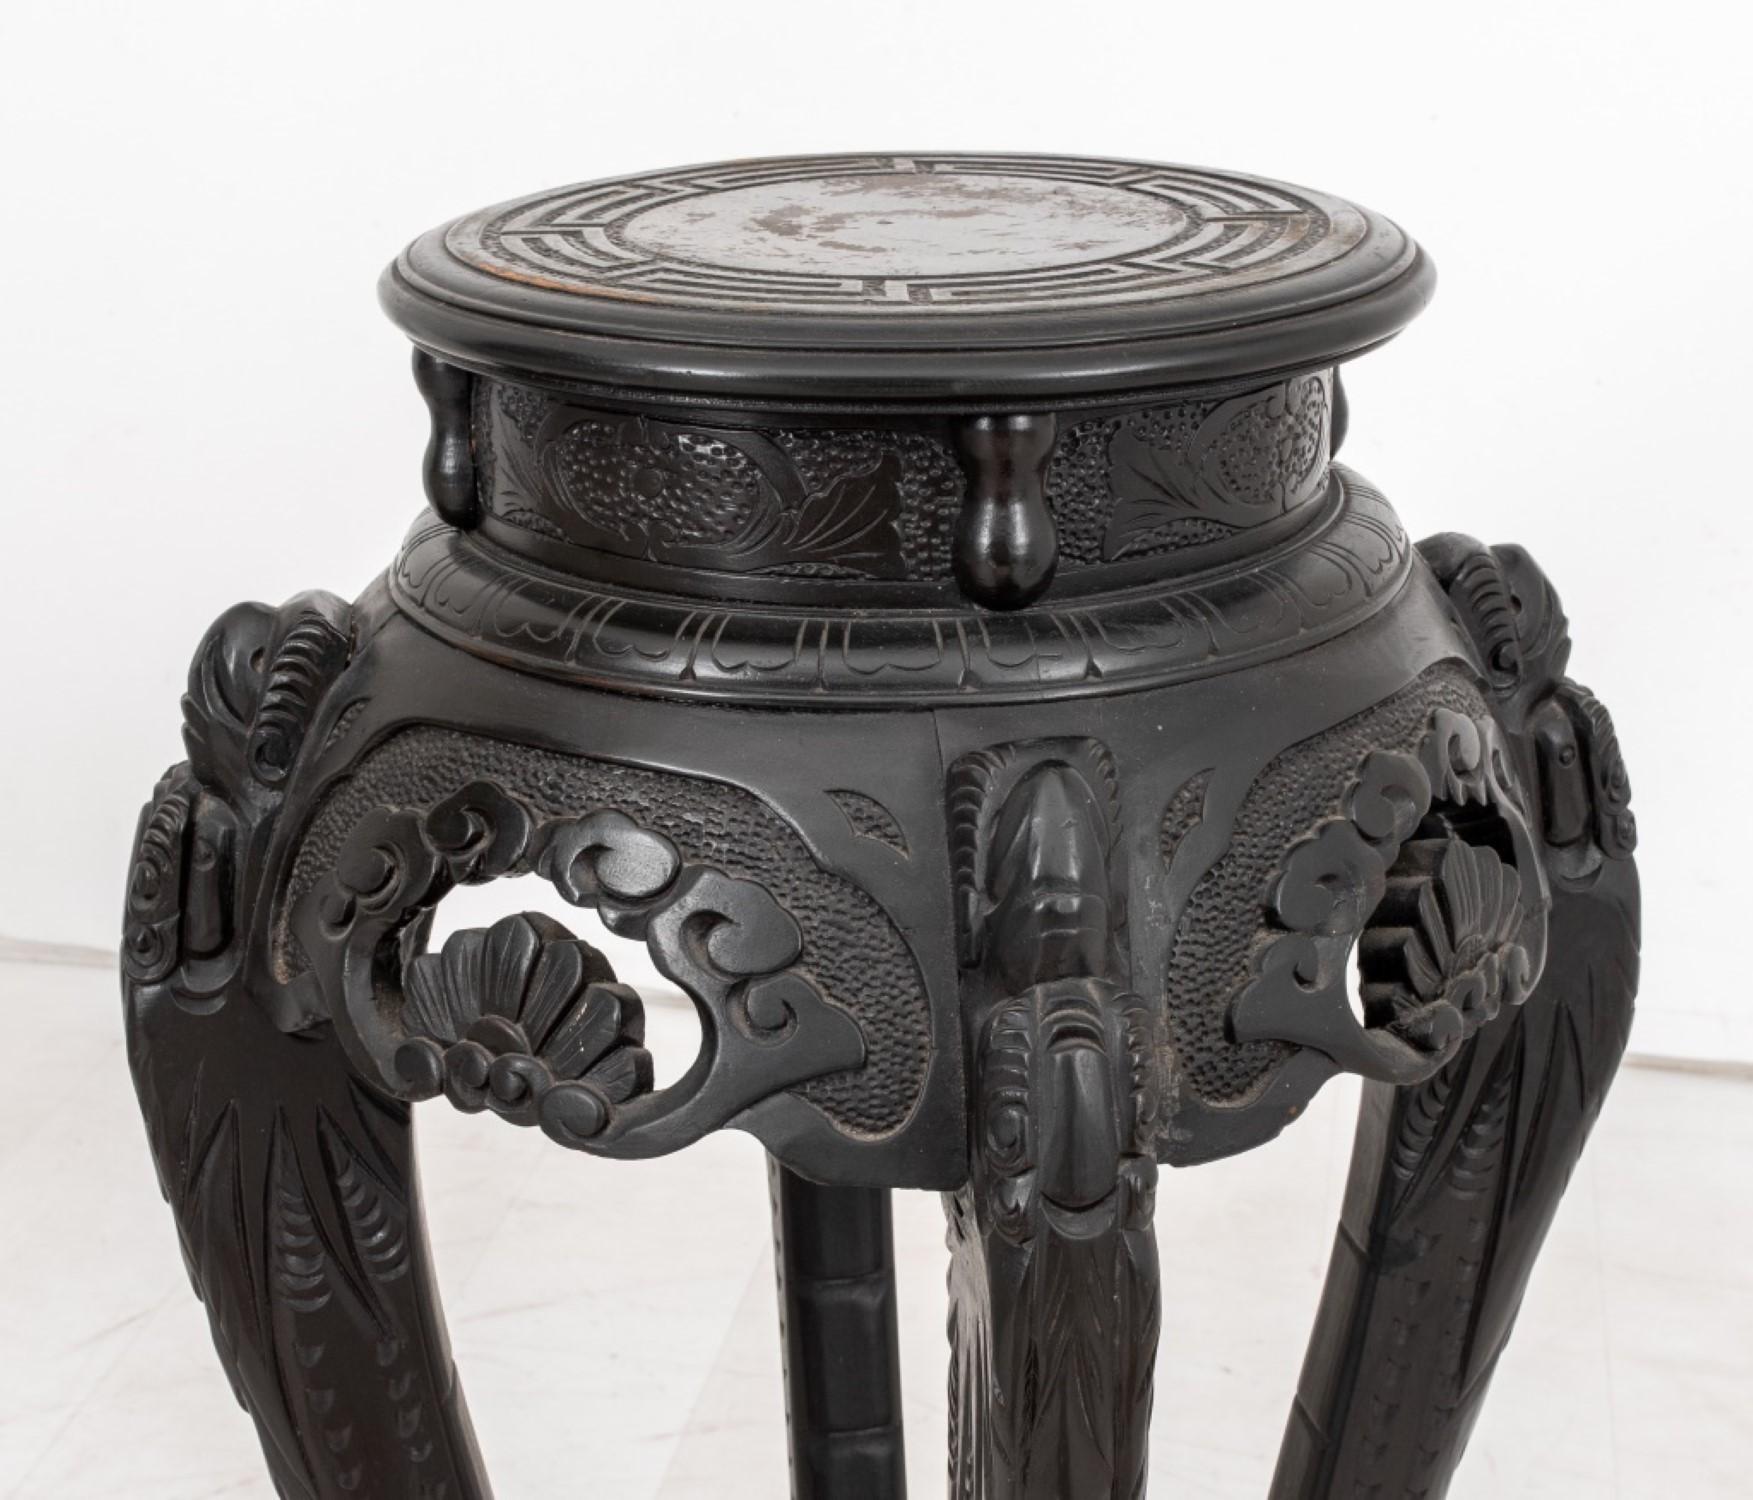 The Chinese carved plant stand or small table has dimensions of 34